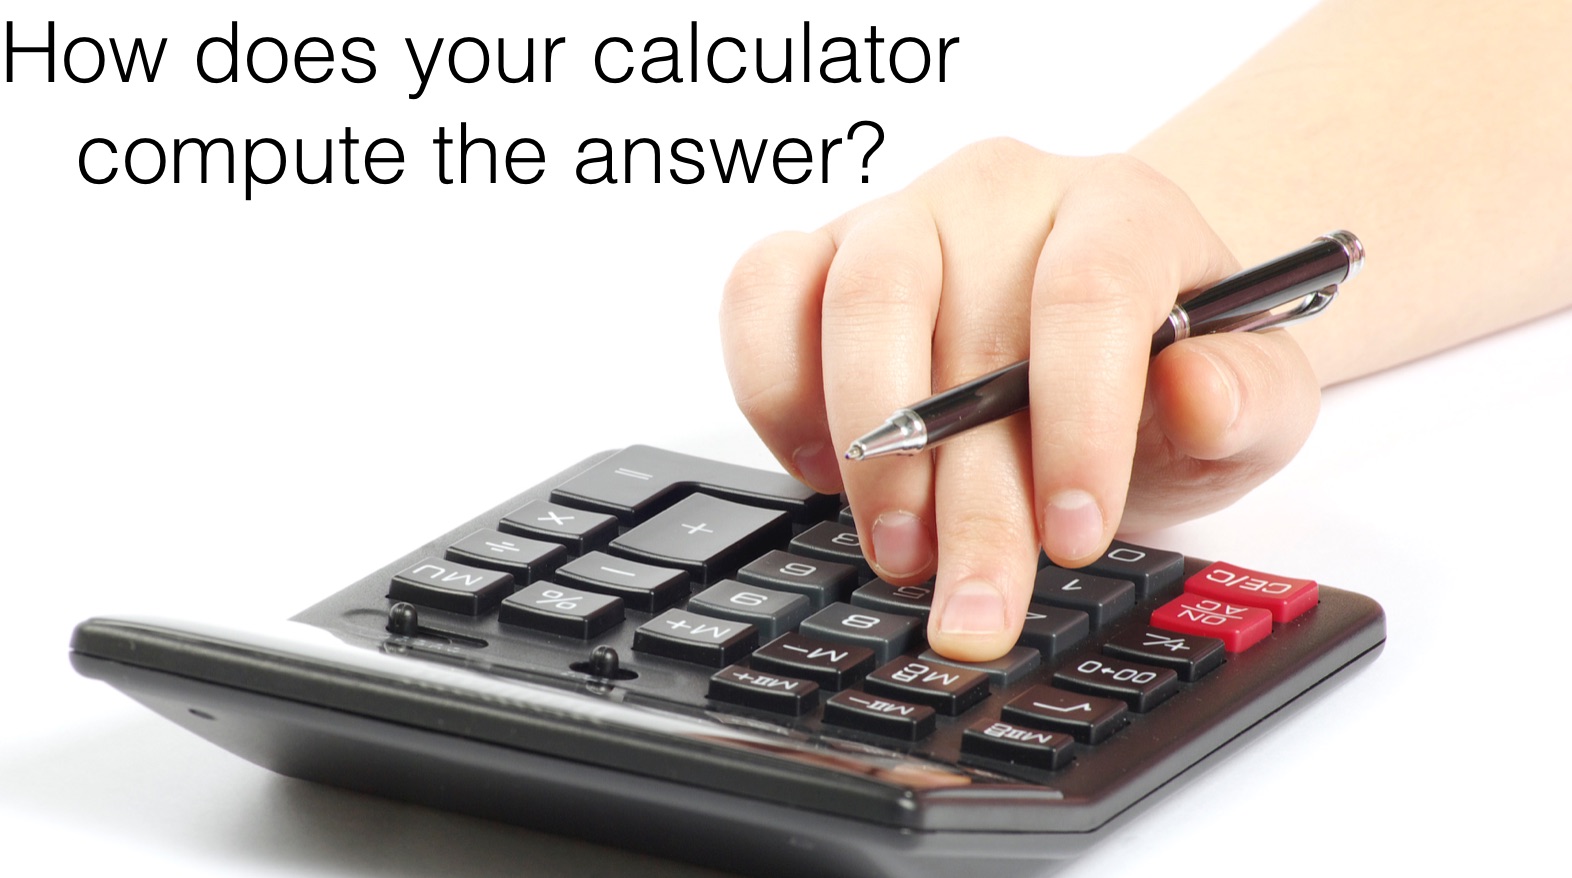 How does your computer calculate?